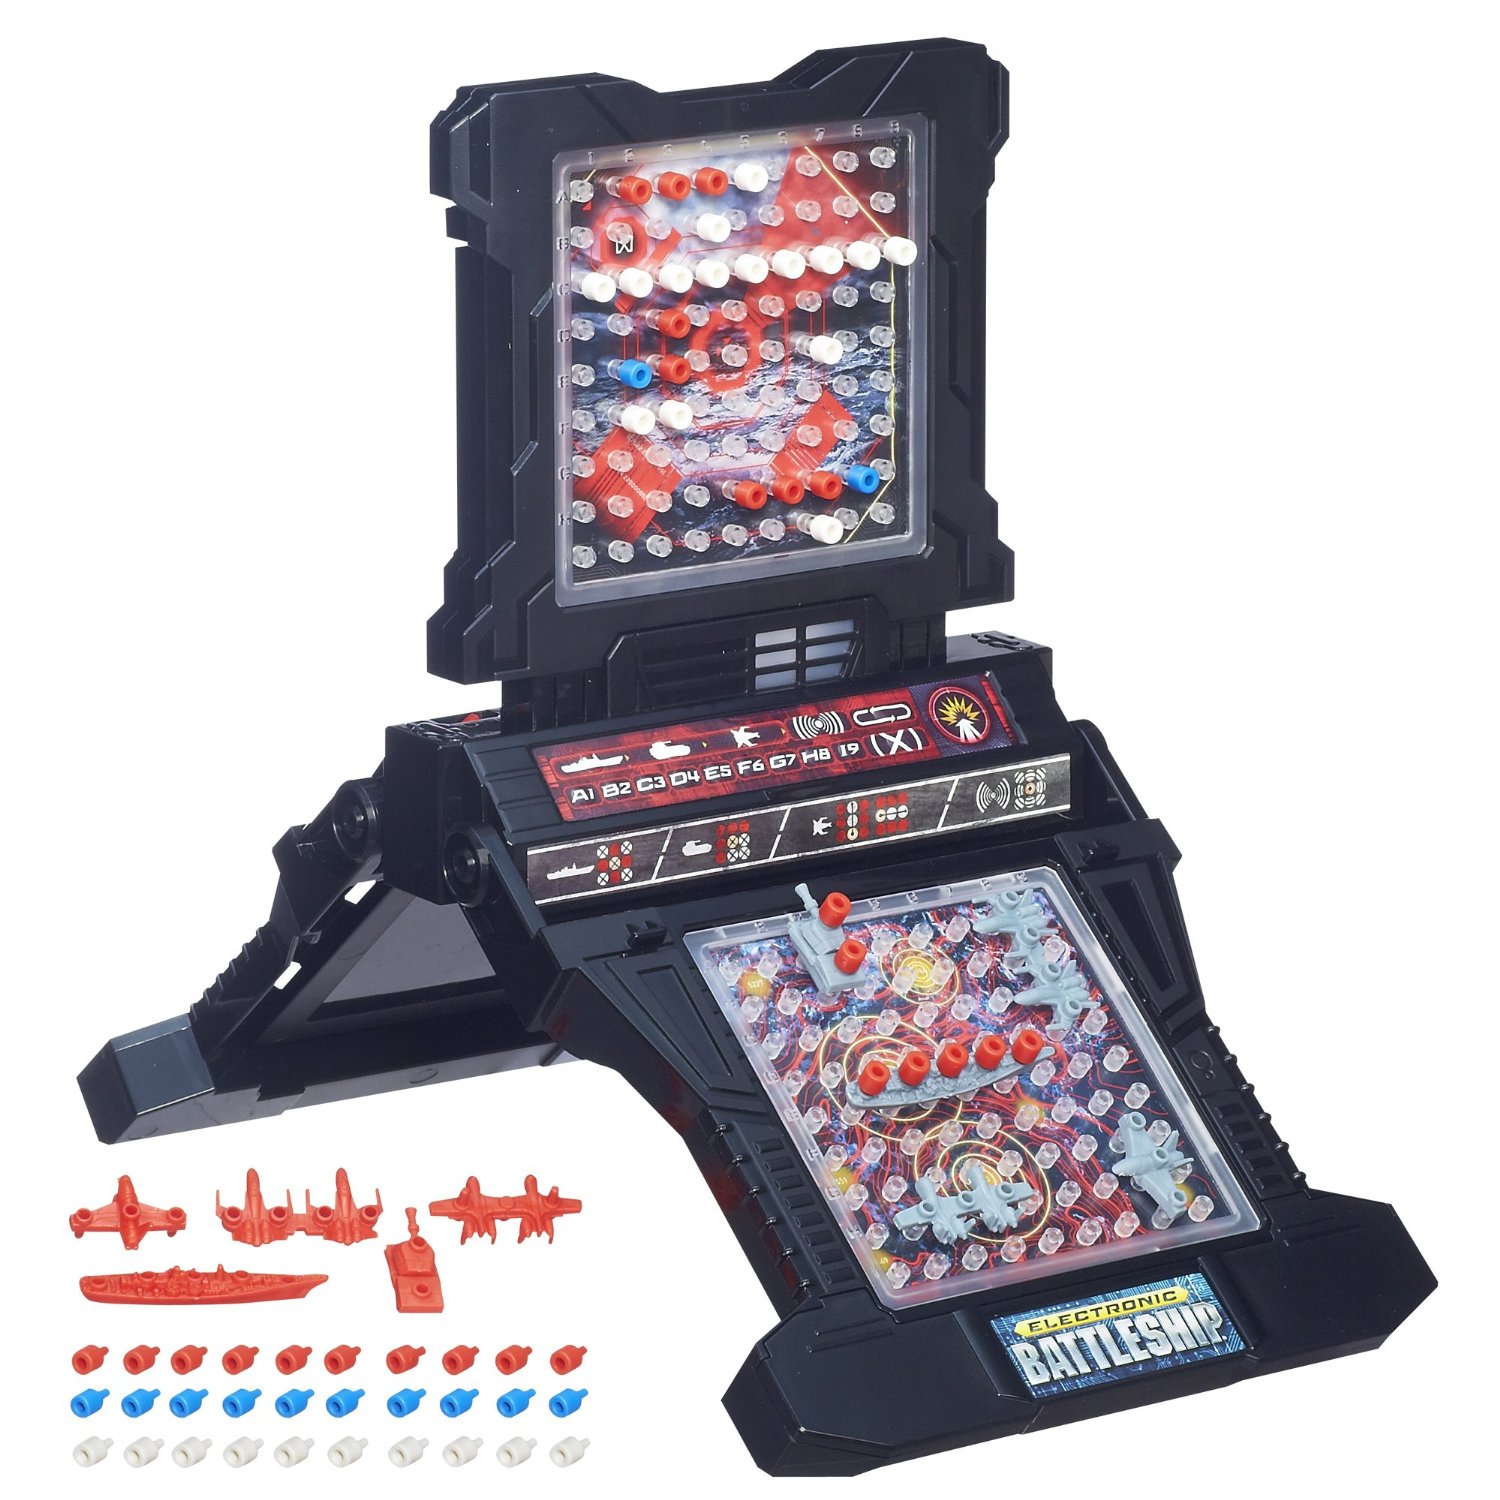 Electronic Table Games